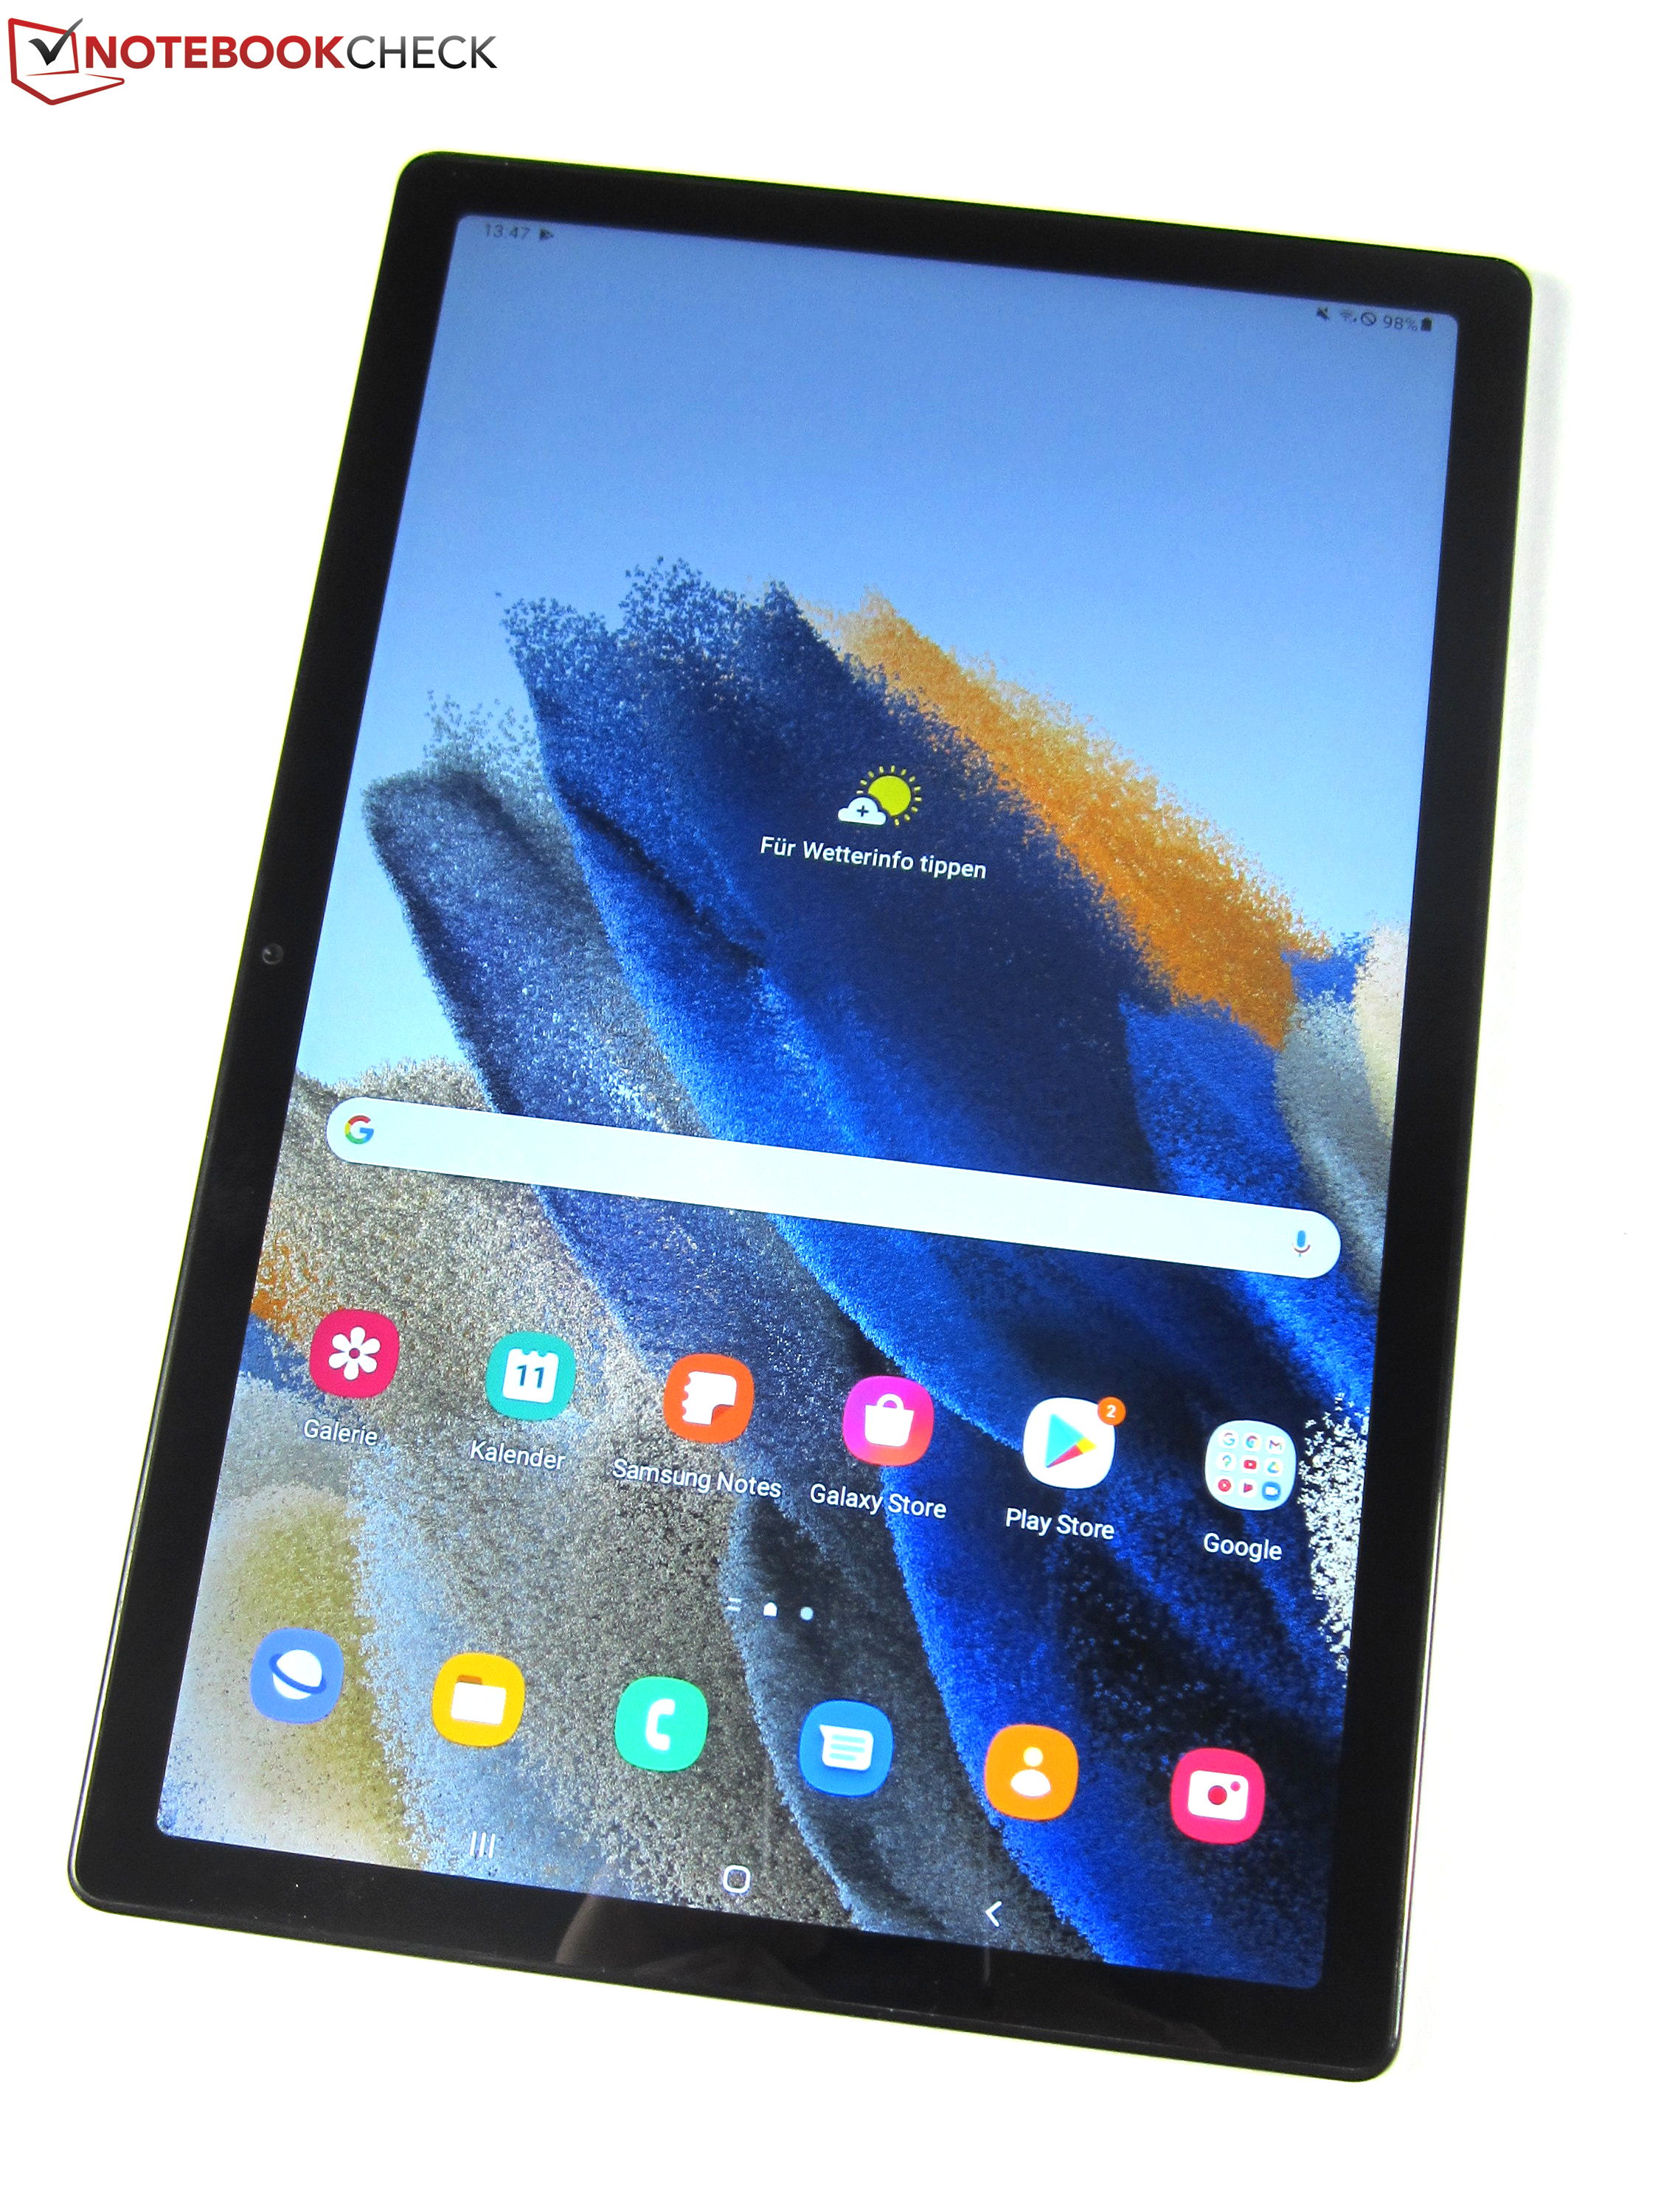 Samsung Galaxy Tab A8 - The new edition of the affordable mid